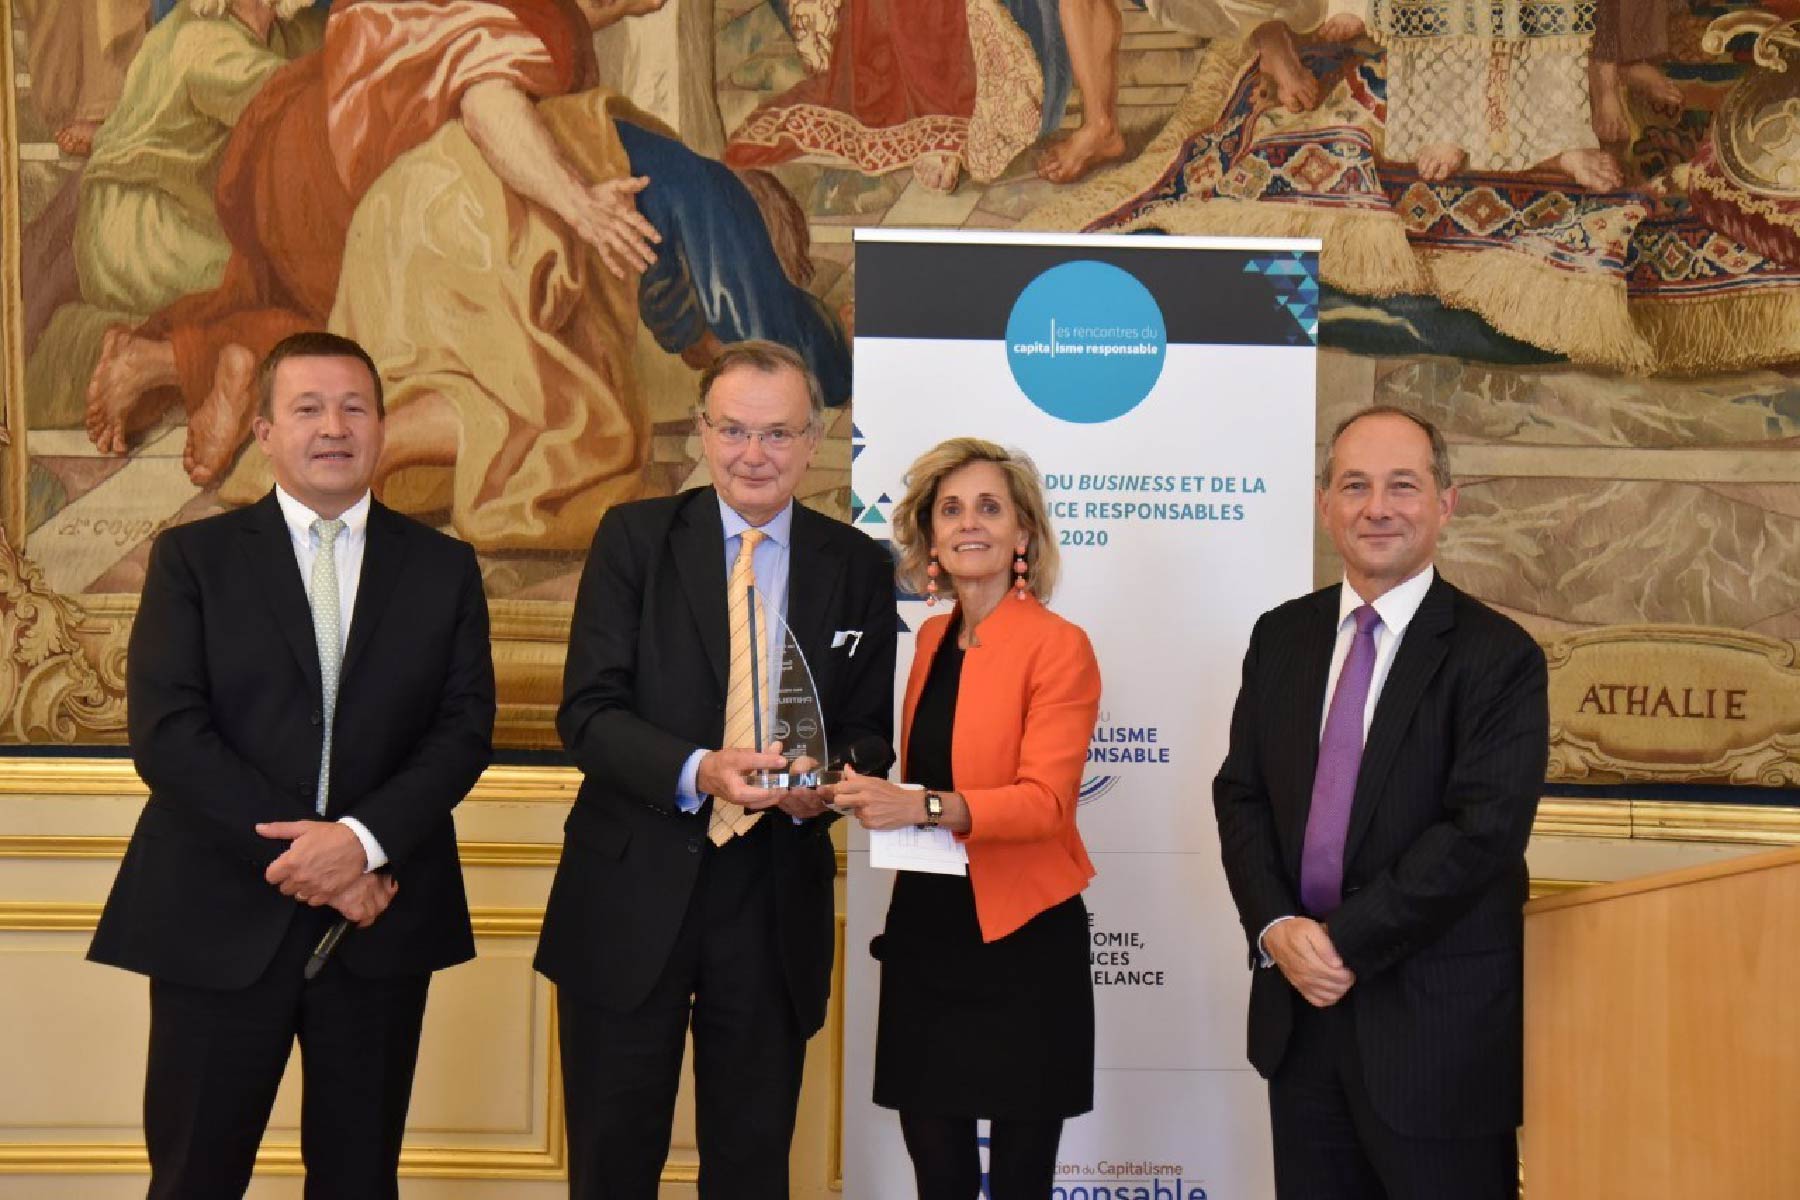 Phitrust receives the Special Investor Award at the 4th edition of the Grands Prix du Business and Responsible Governance Awards